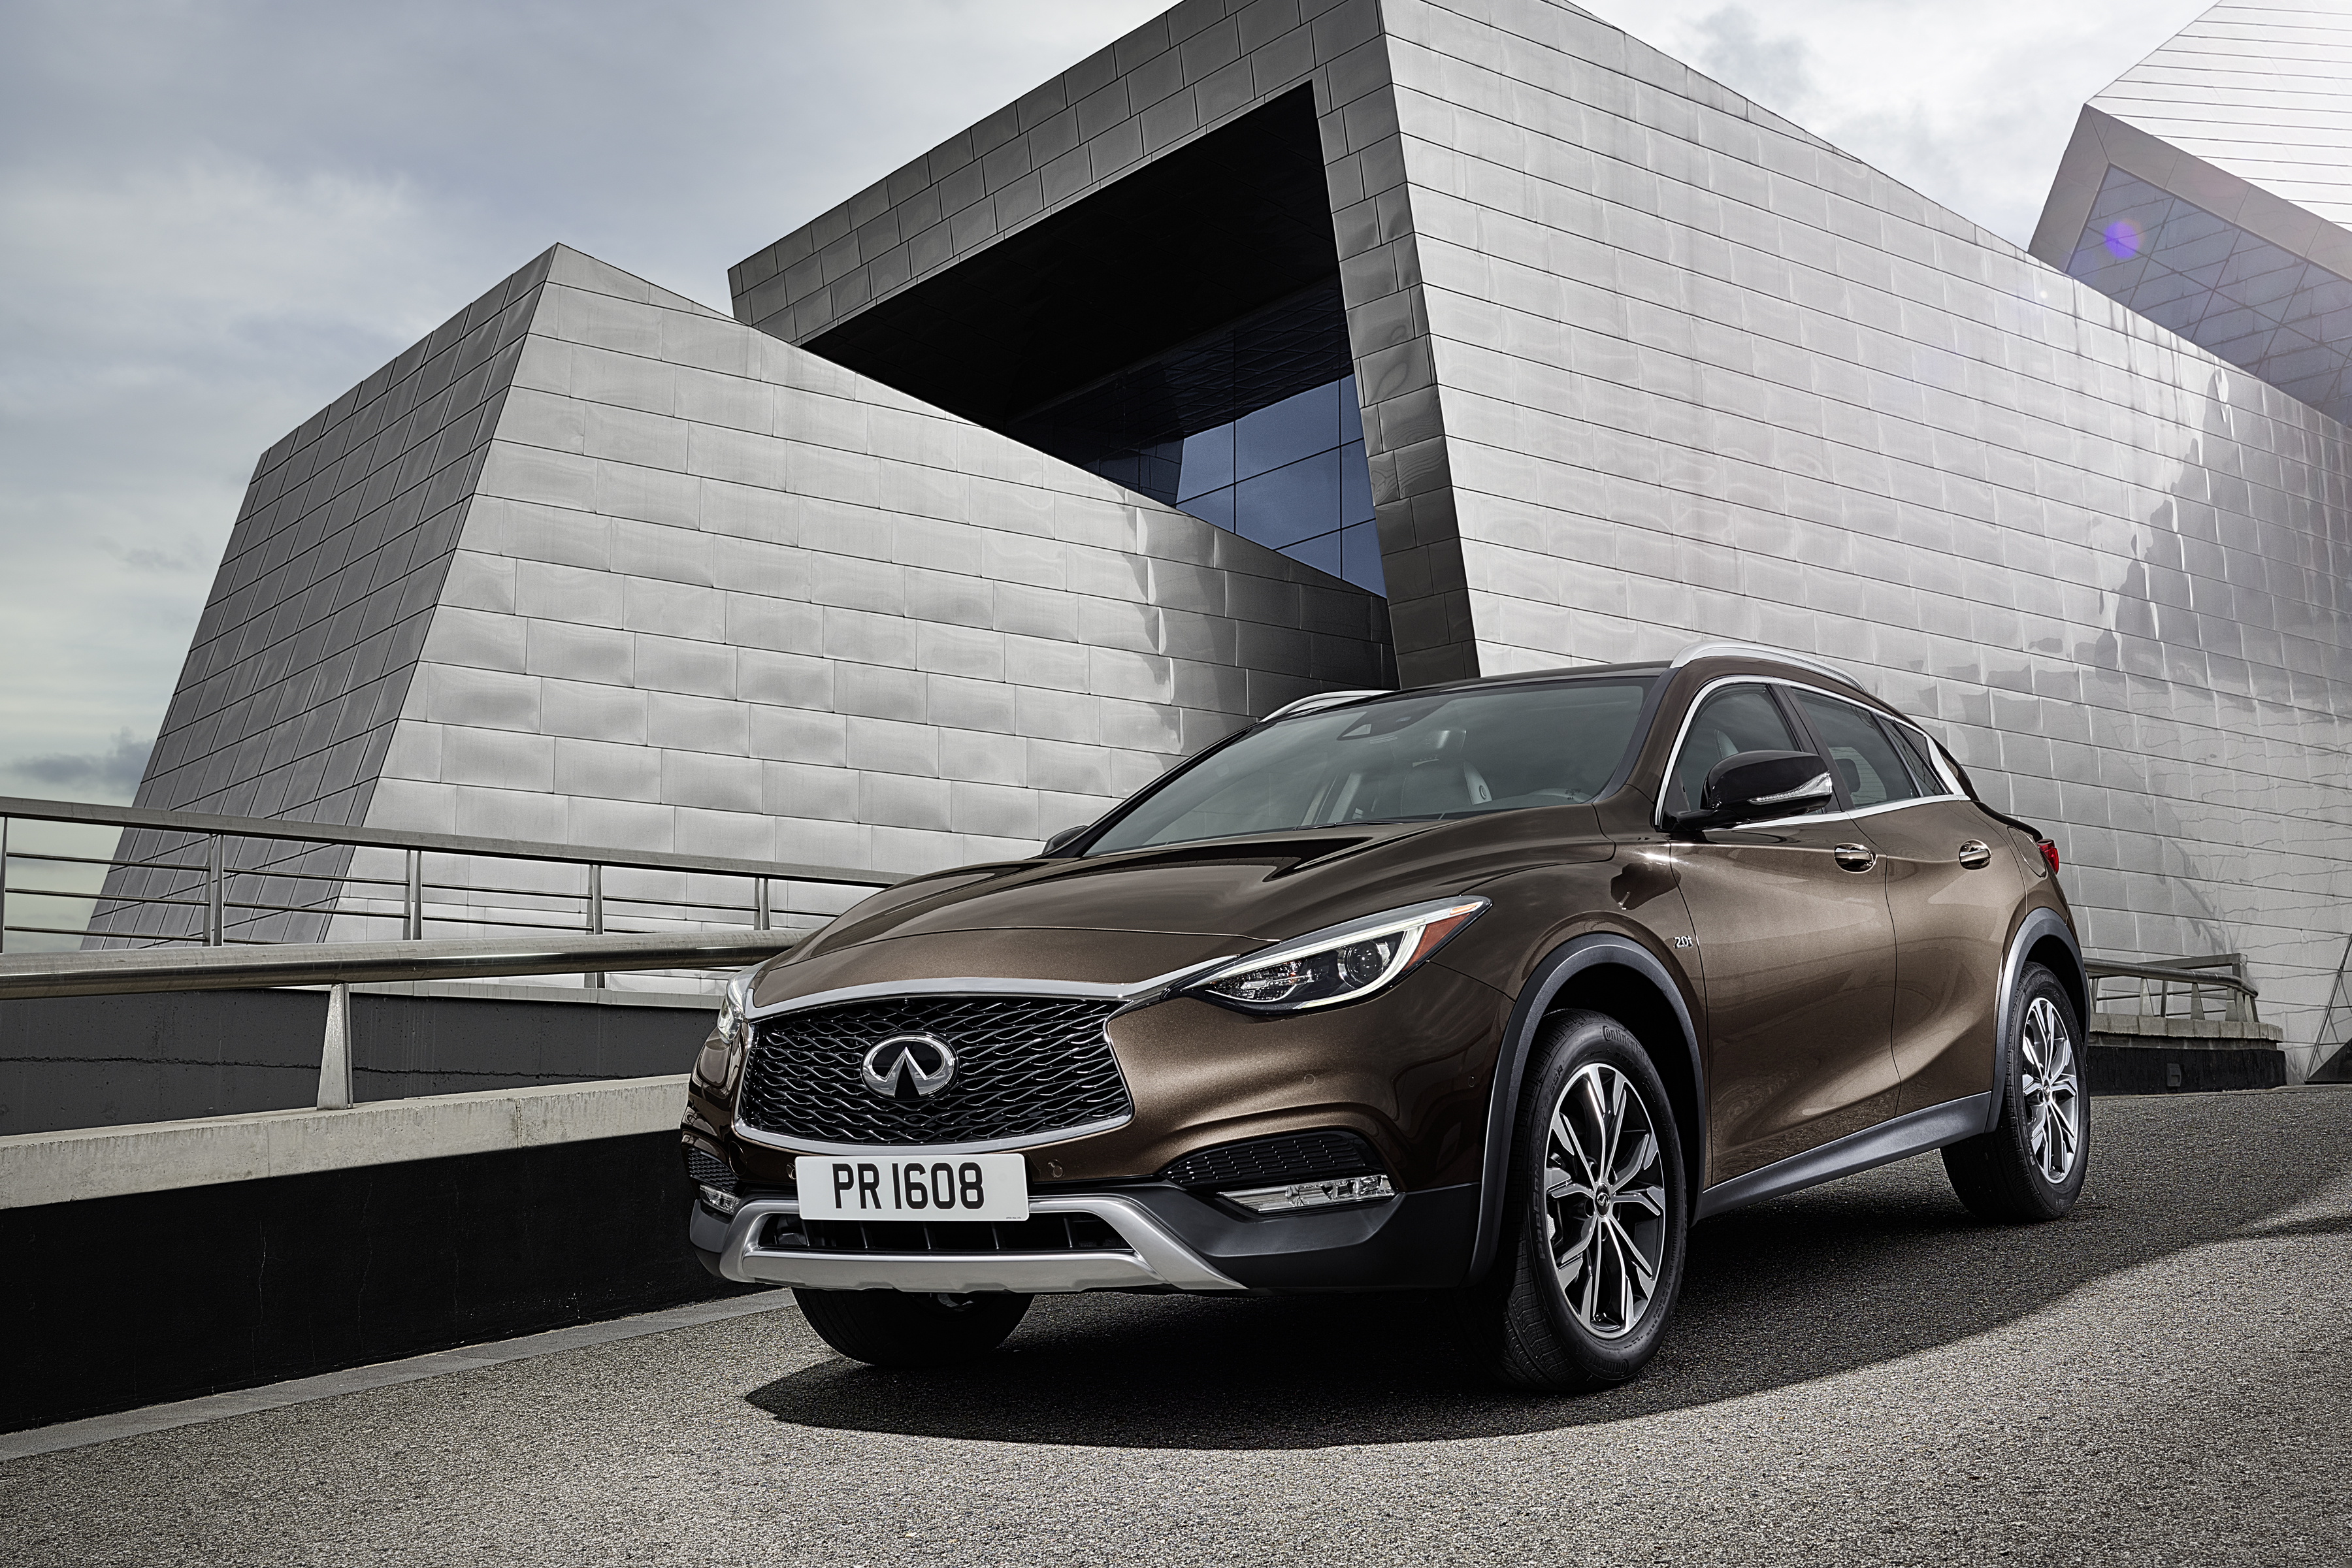 Stylish and intelligent INFINITI QX30 crossover makes debut in Abu Dhabi and Al Ain market